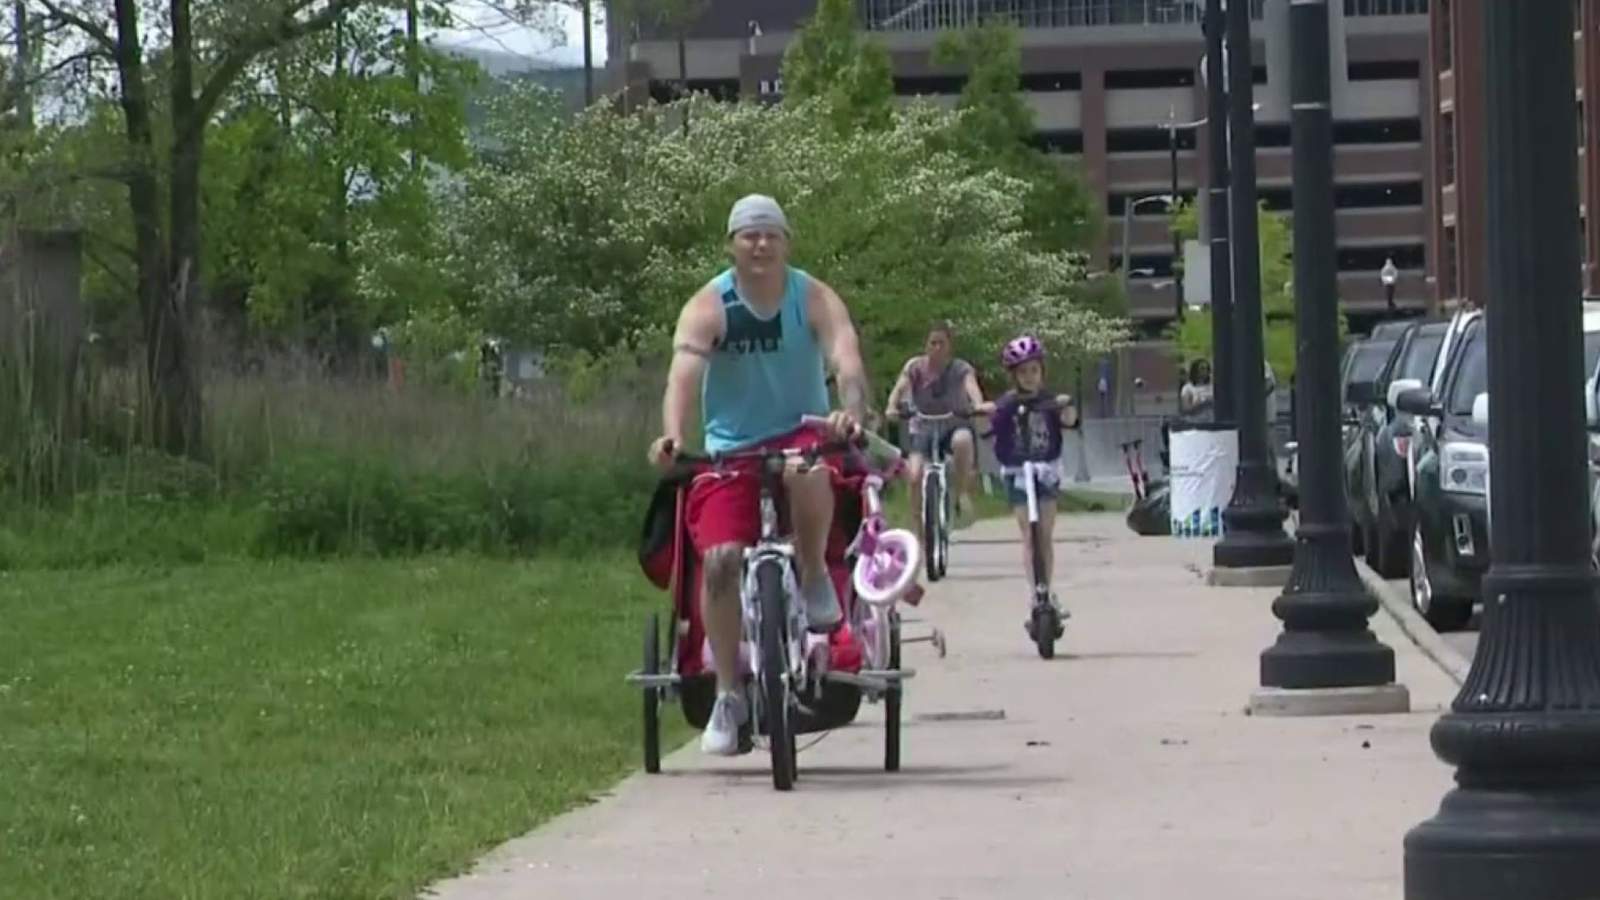 Bikes become hot commodity in Metro Detroit amid pandemic